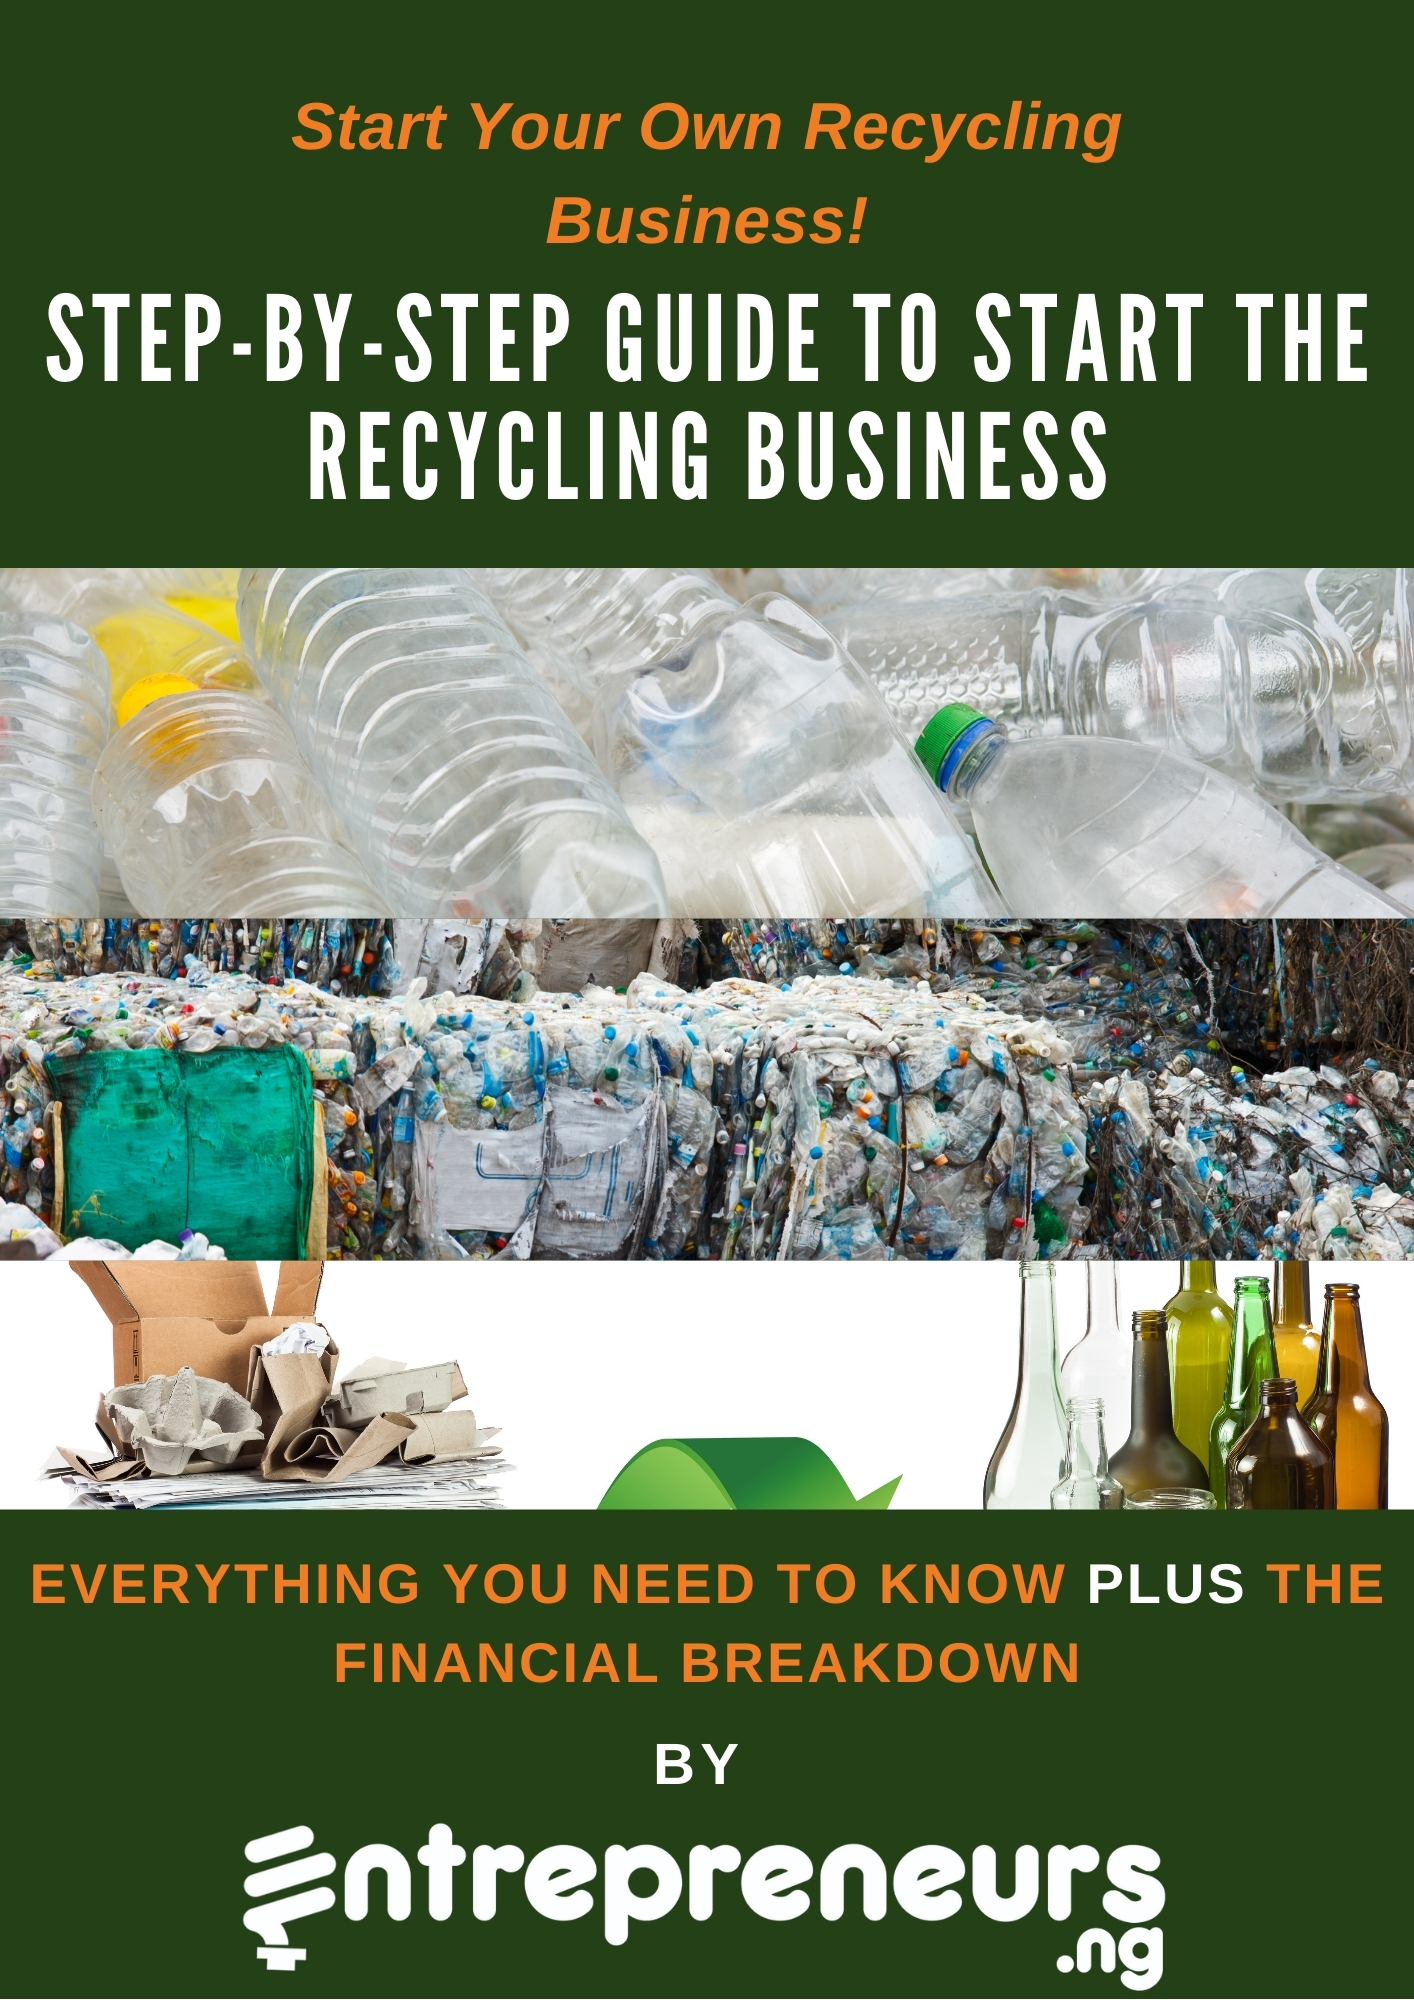 example of a recycling business plan